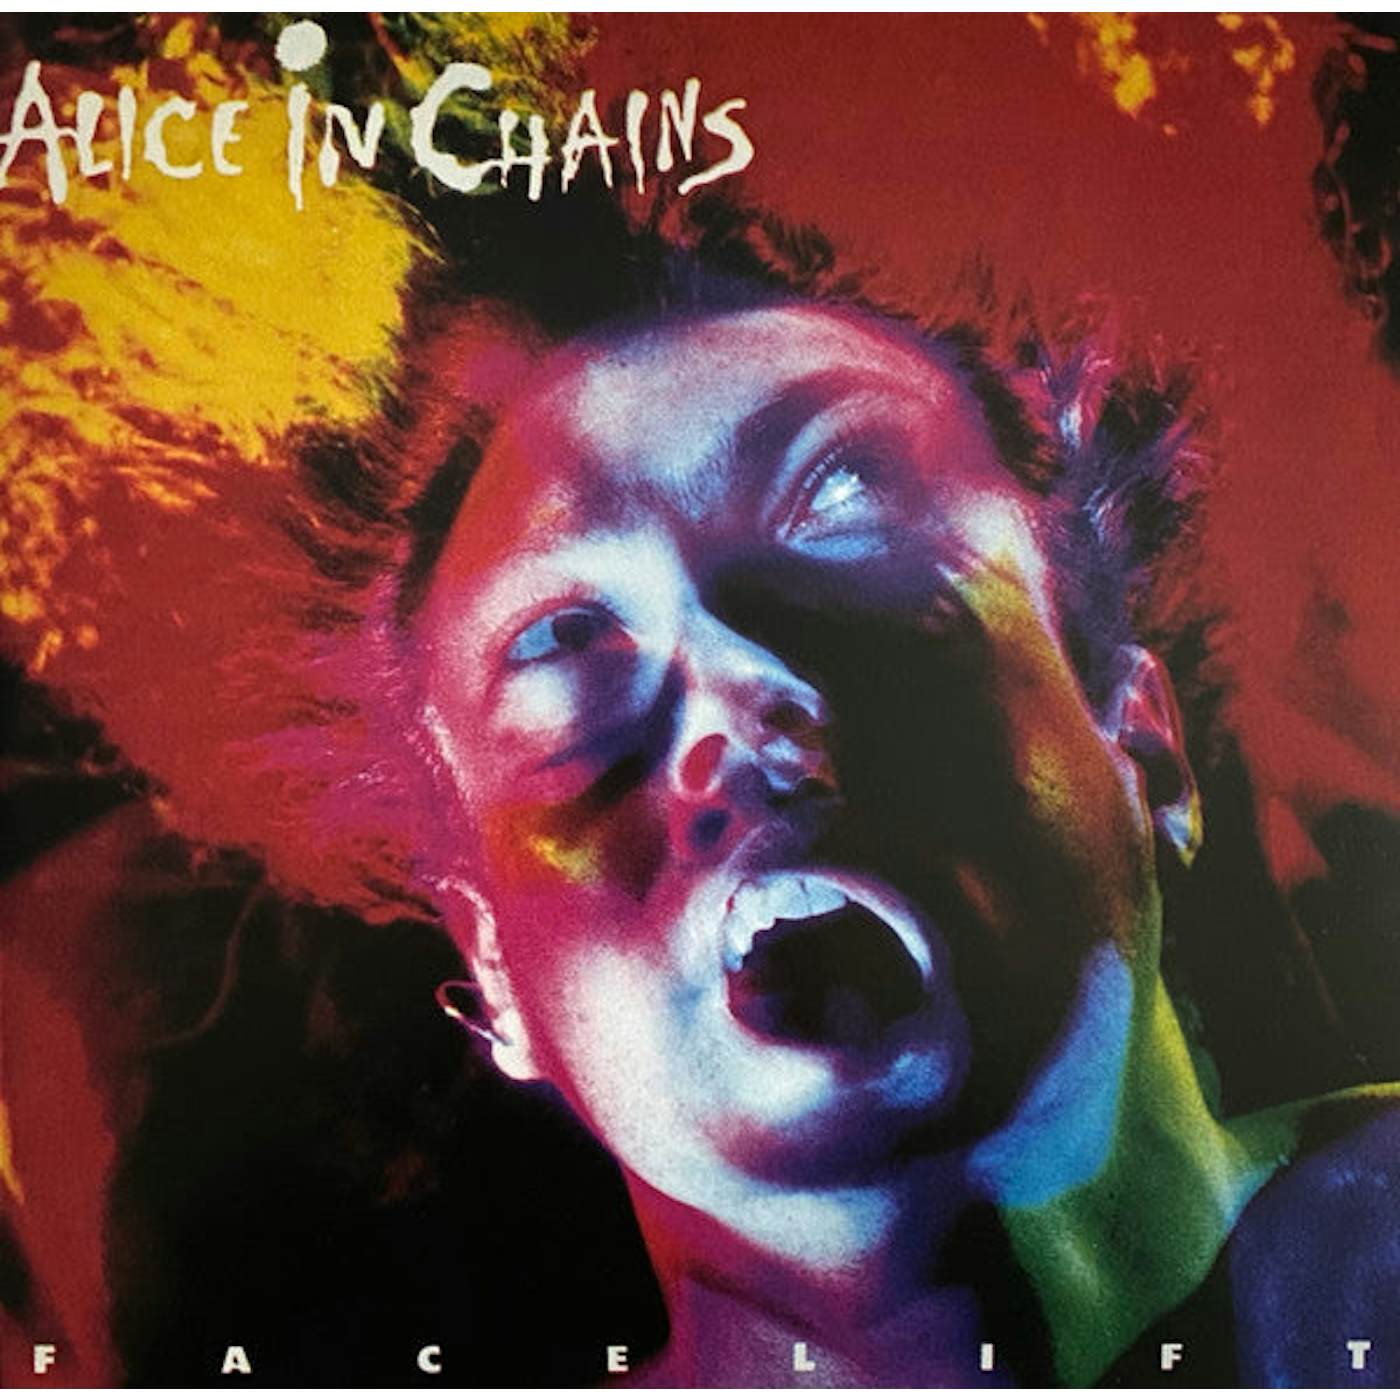 Alice In Chains LP Vinyl Record - Facelift